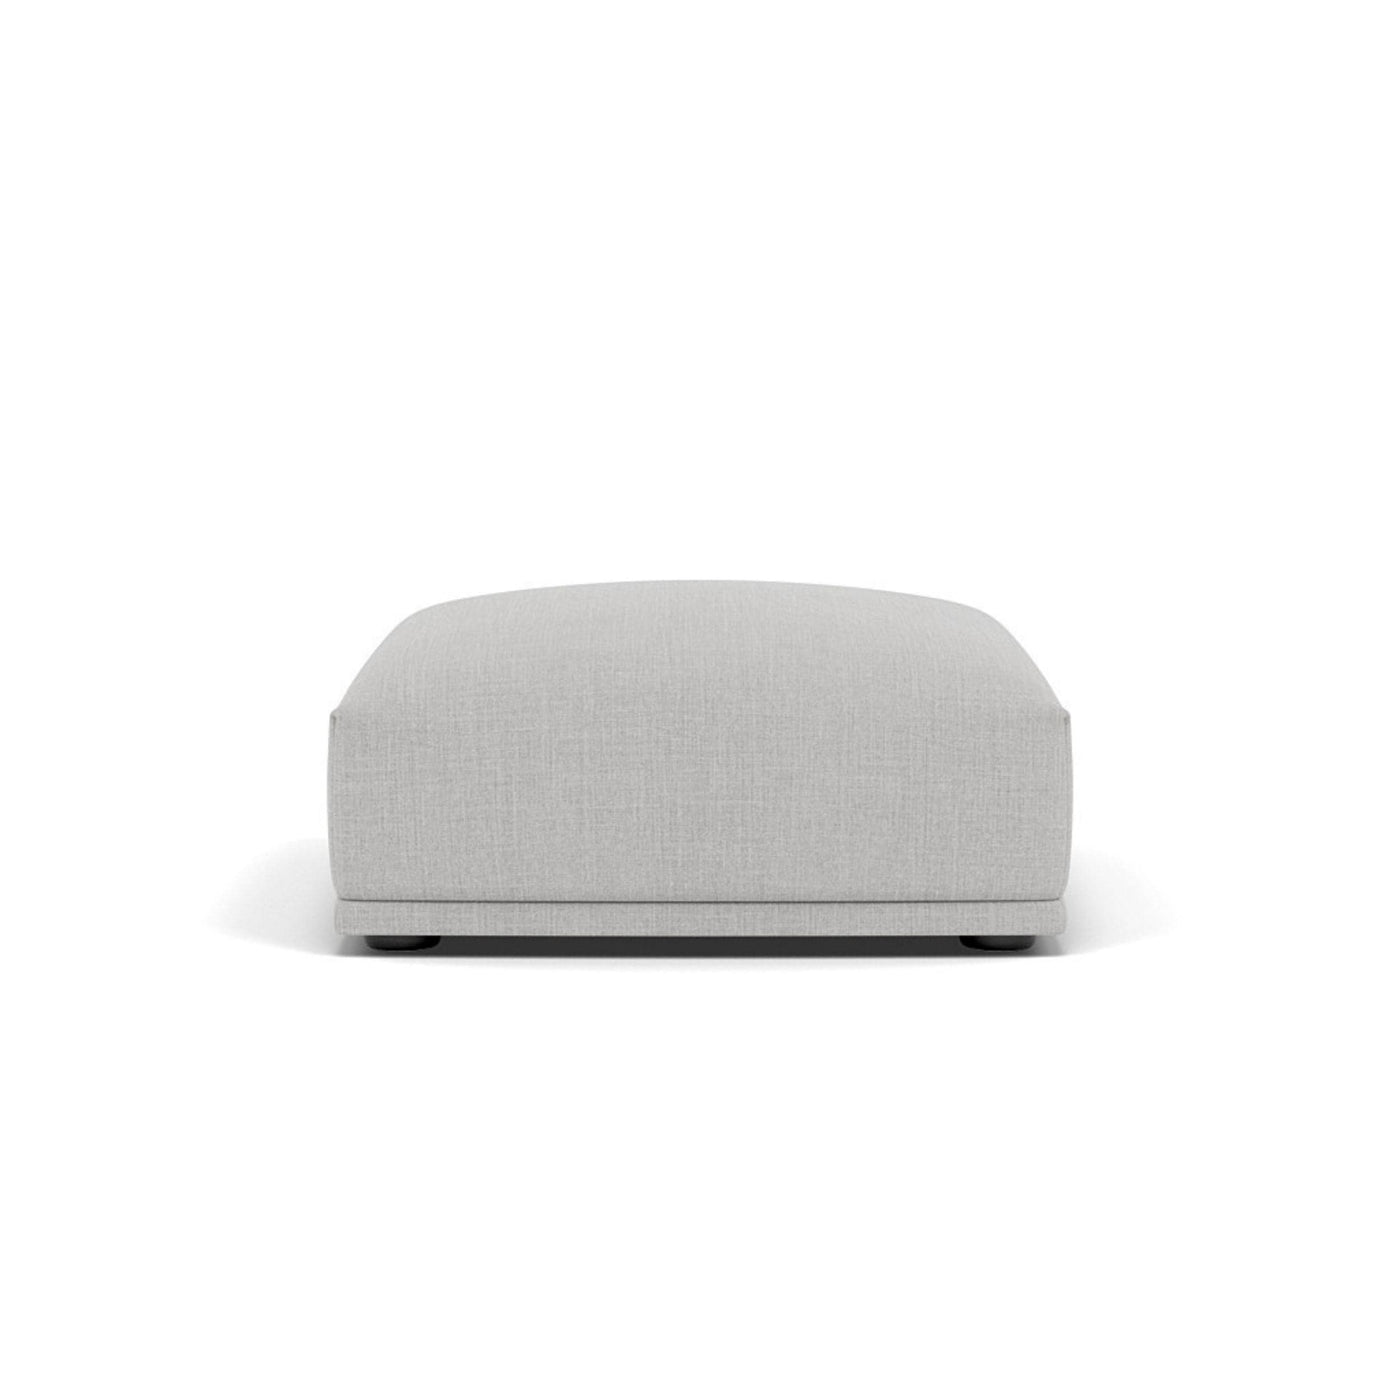 Muuto Connect Modular Sofa System, module i, short ottoman remix 123 grey fabric. Available from someday designs. #colour_remix-123